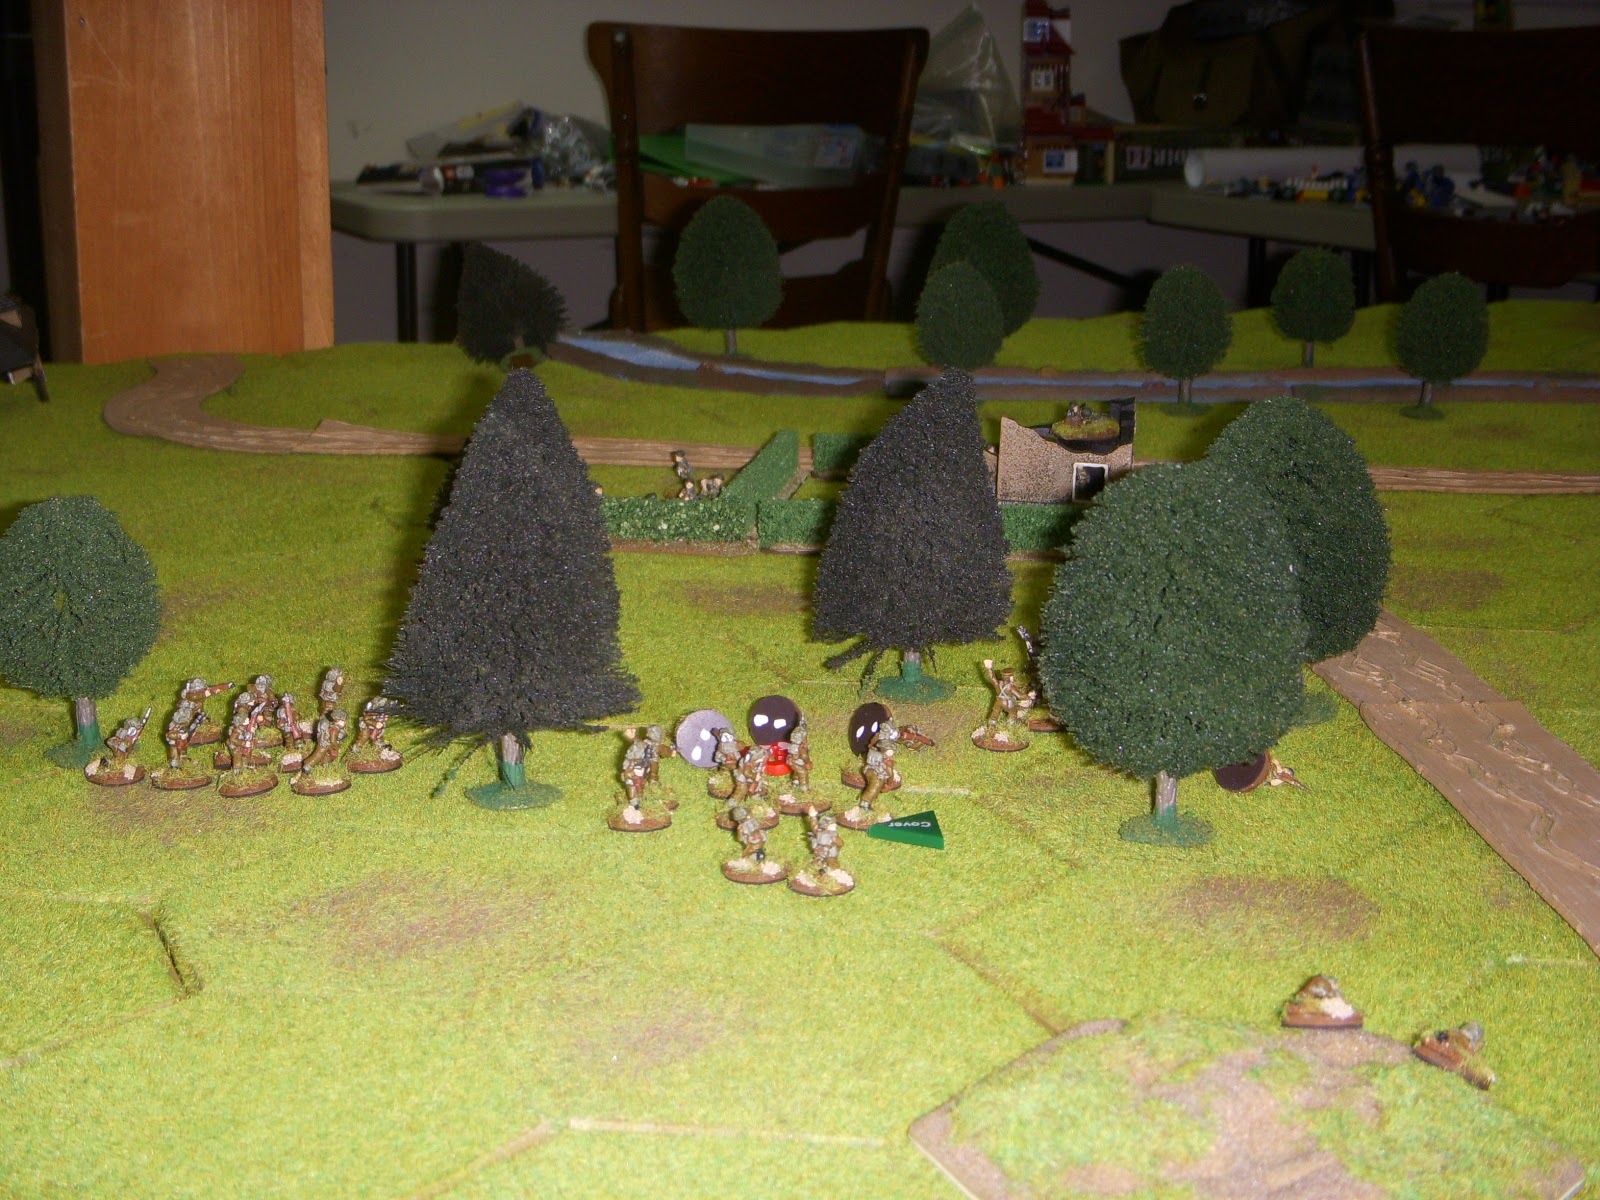  2nd Platoon ran into heavy fire by the second objective, but overcame the enemy with a combination of fire and manoeuvre. 